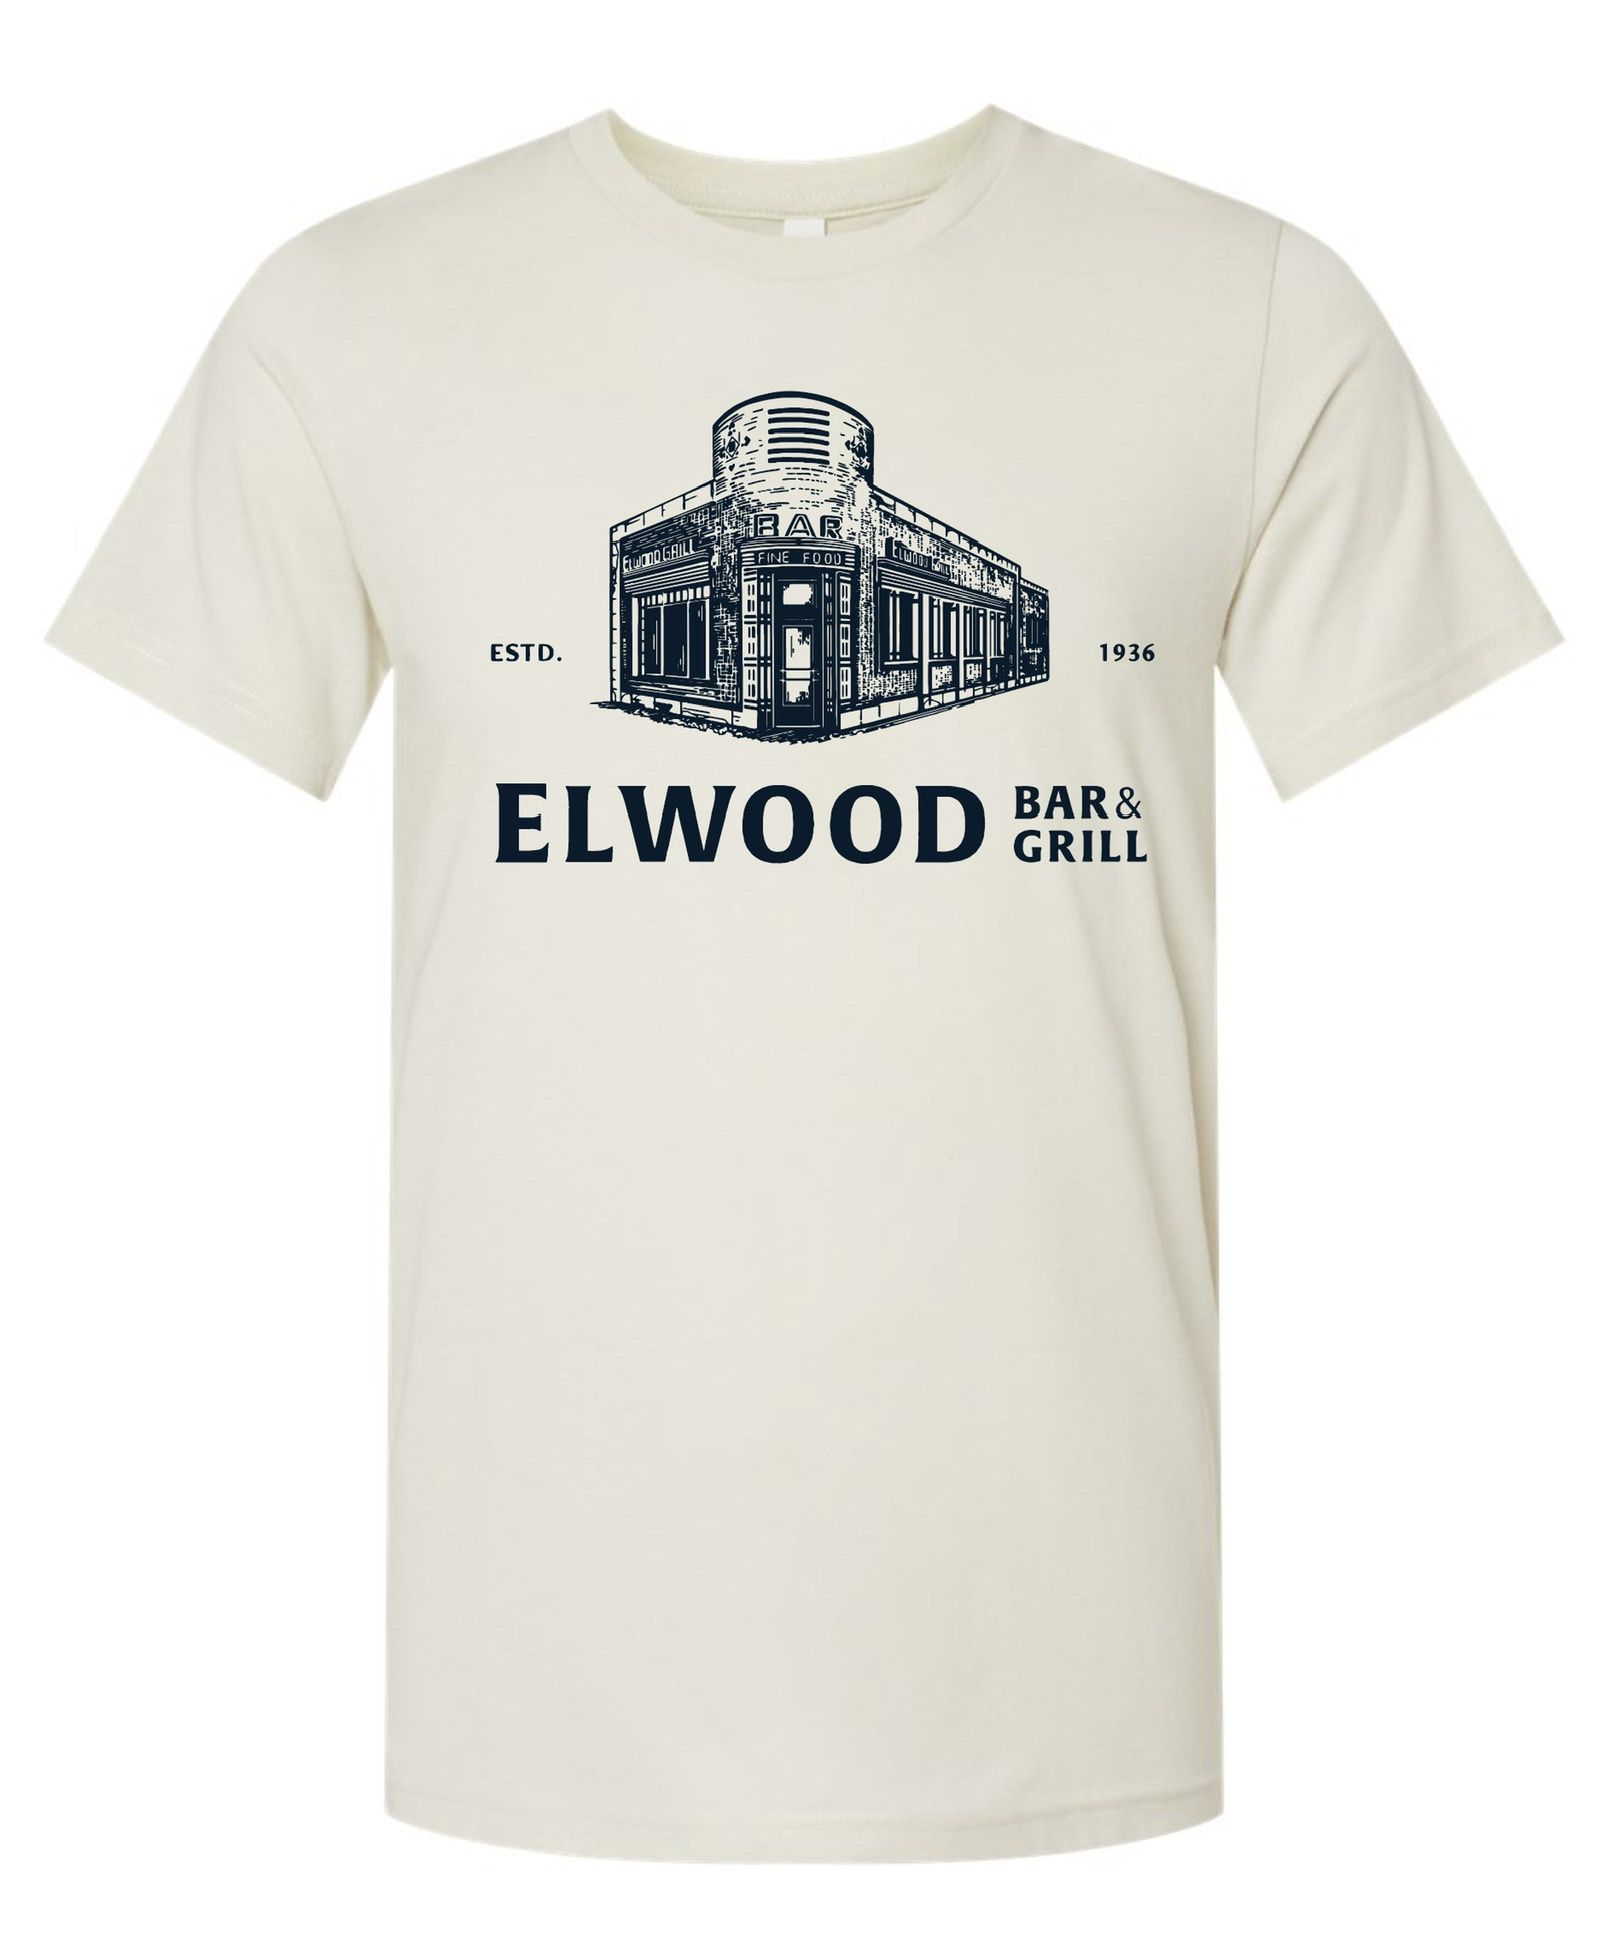 Elwood Bar And Grill T-Shirt - Vintage Look - A True Detroit Relic 